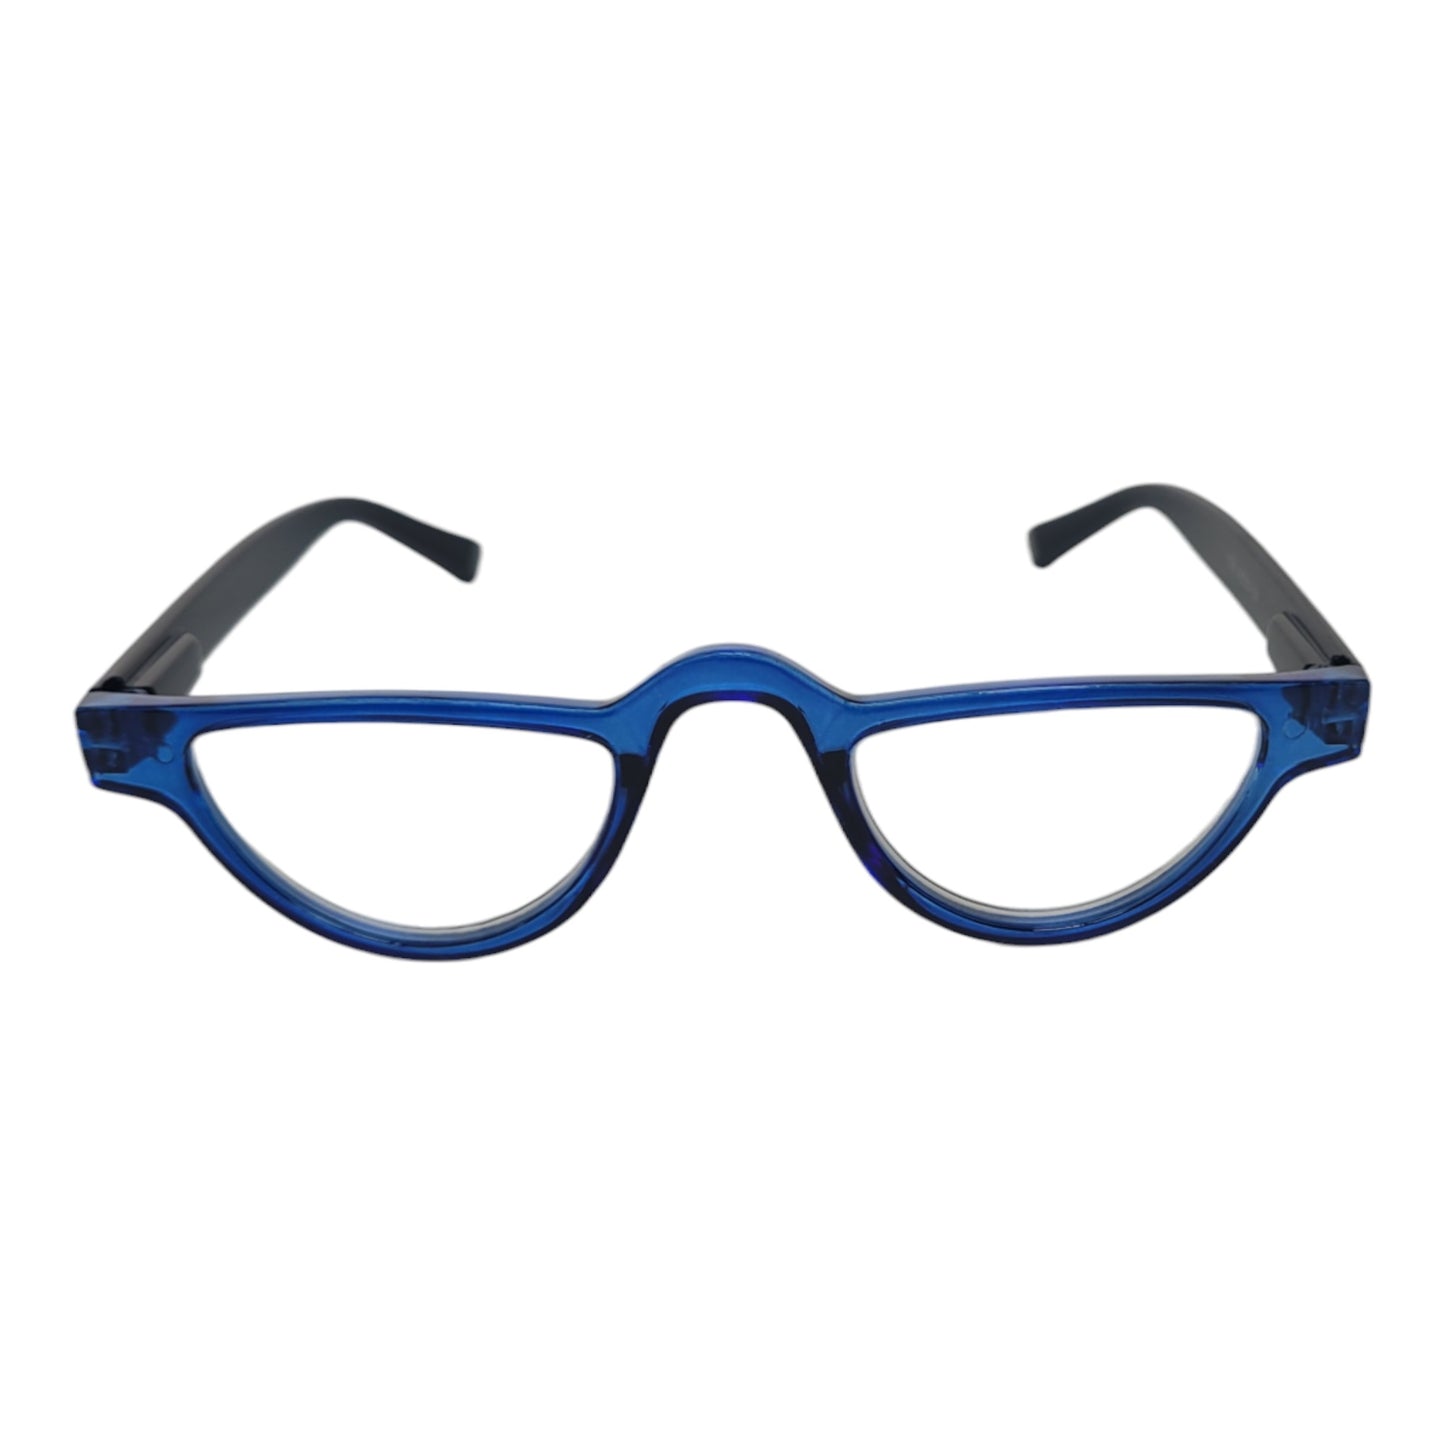 Affaires Blue Classic Reading Glasses For Men and Women MNI